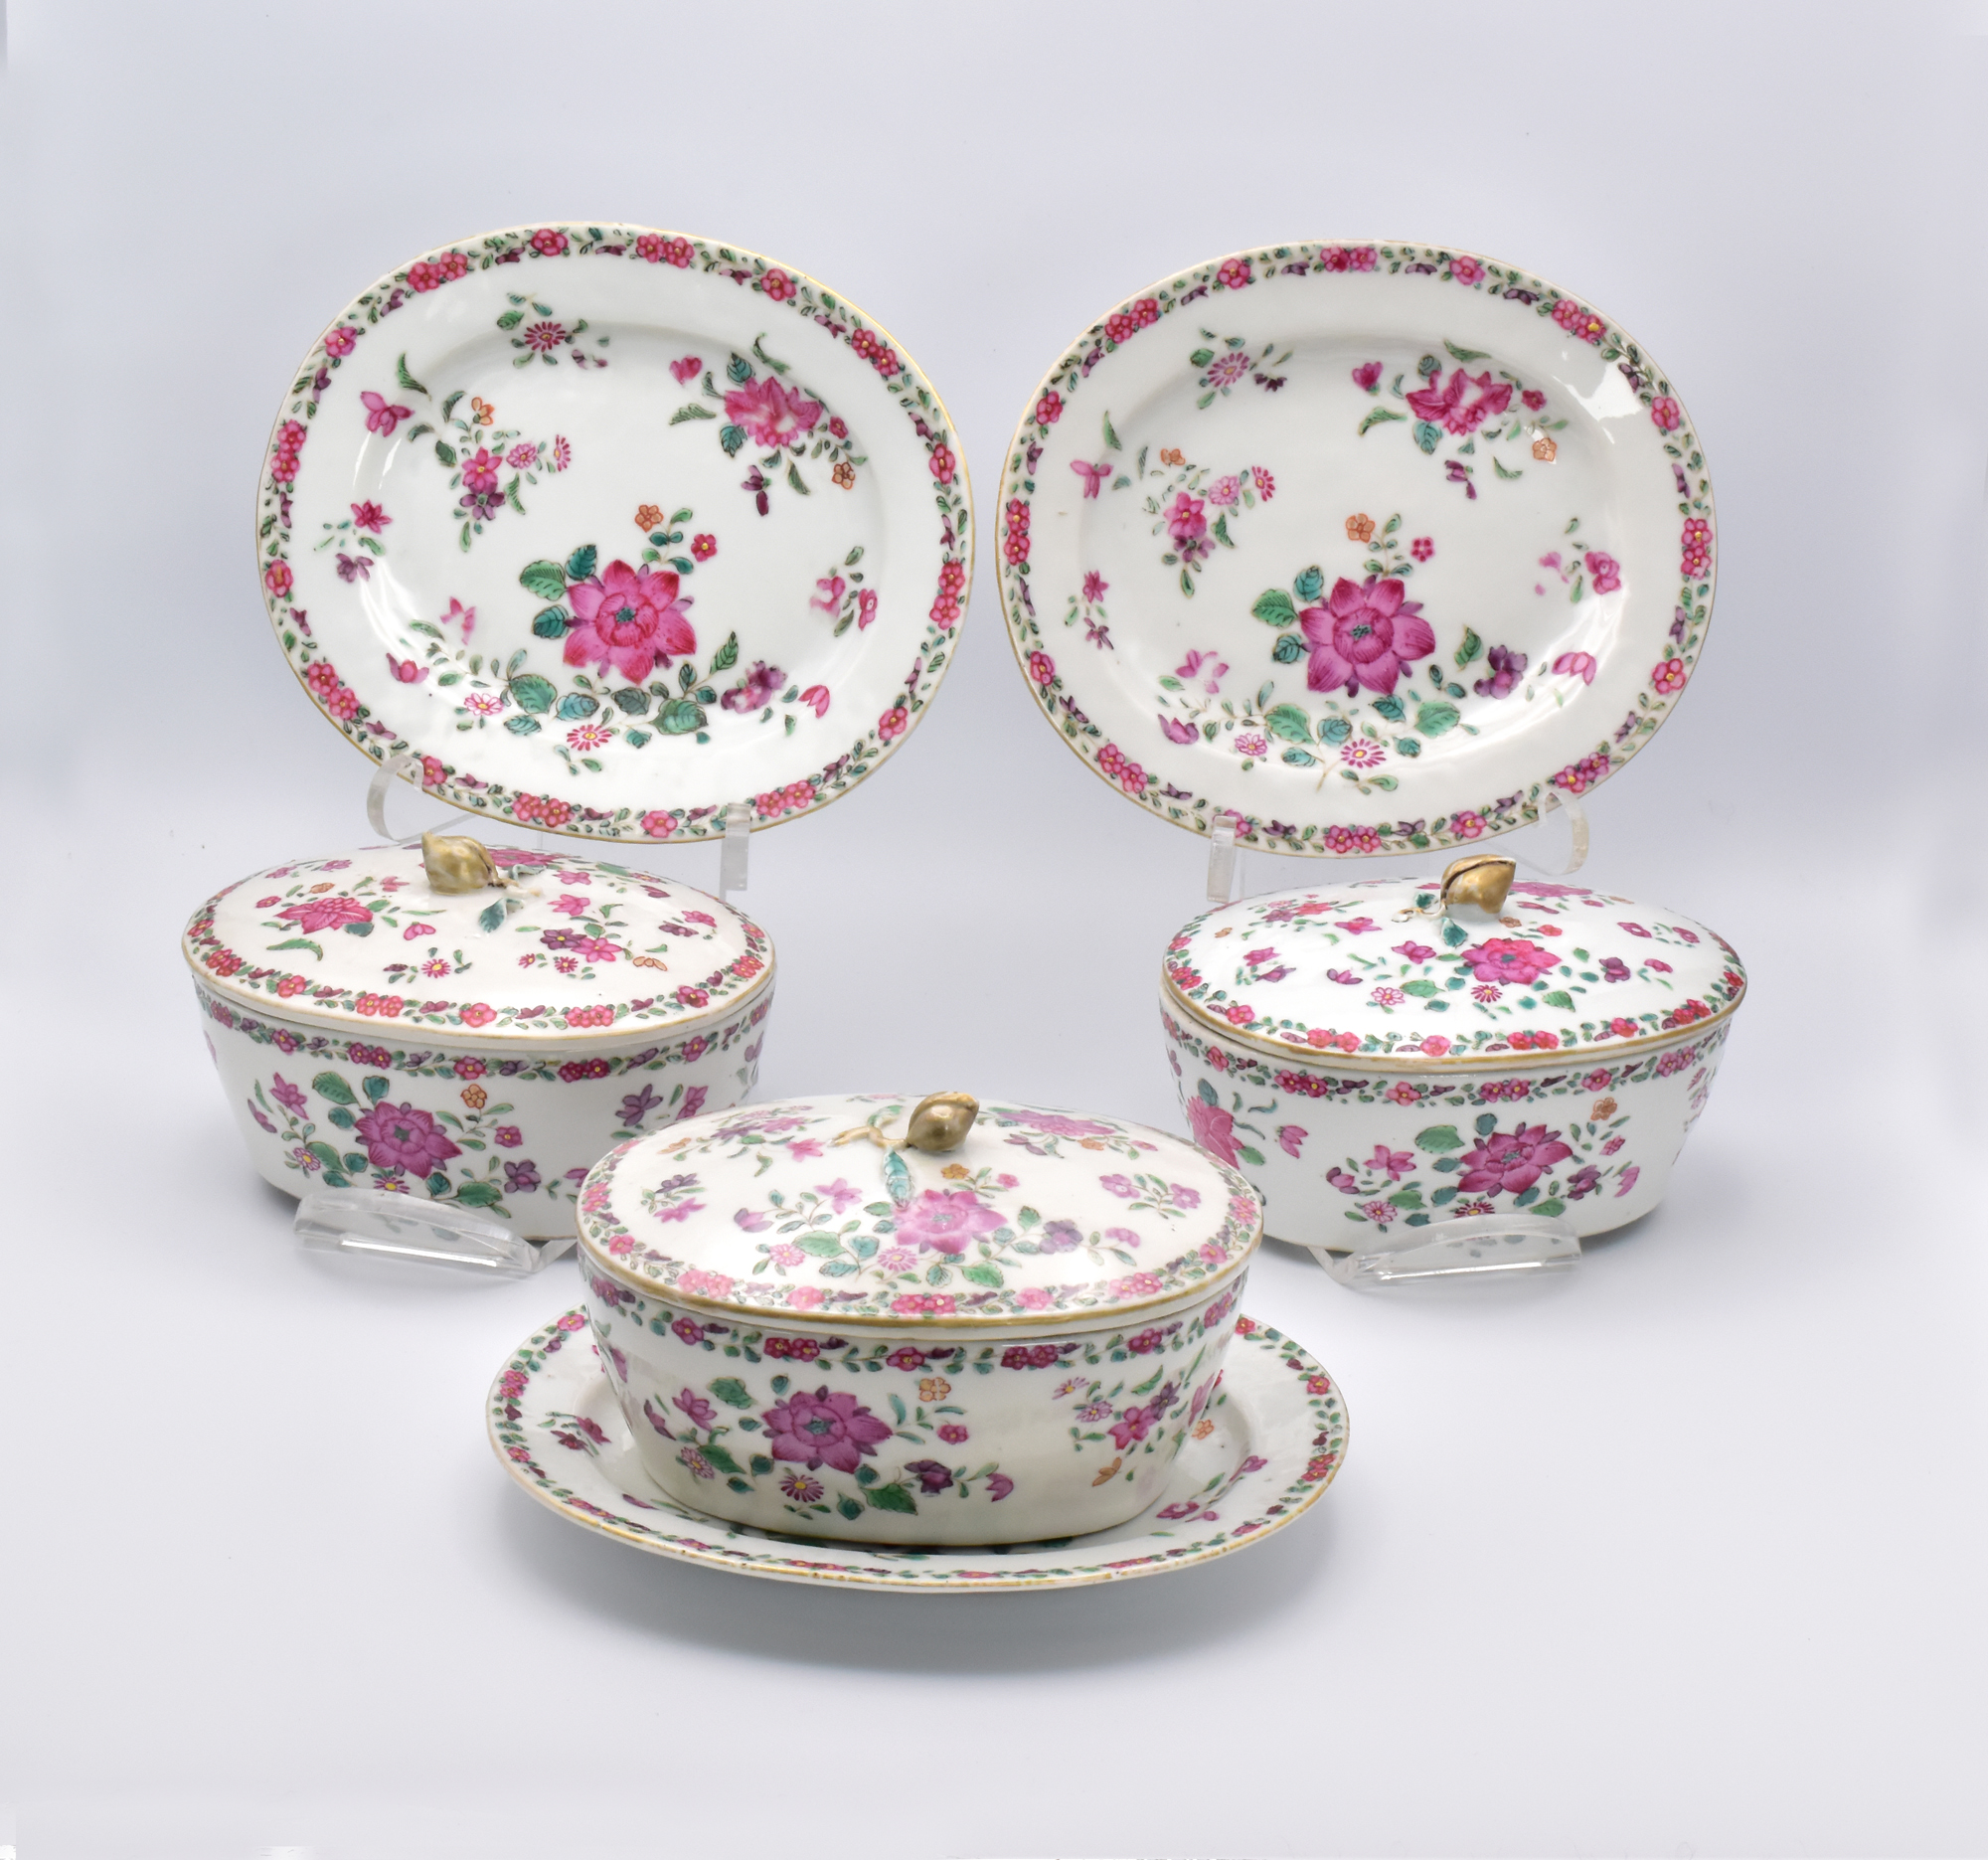 A SET OF THREE CHINESE EXPORT ‘FAMILLE-ROSE’ PORCELAIN BUTTER TUBS, COVERS & STANDS, QIANLONG PERIOD